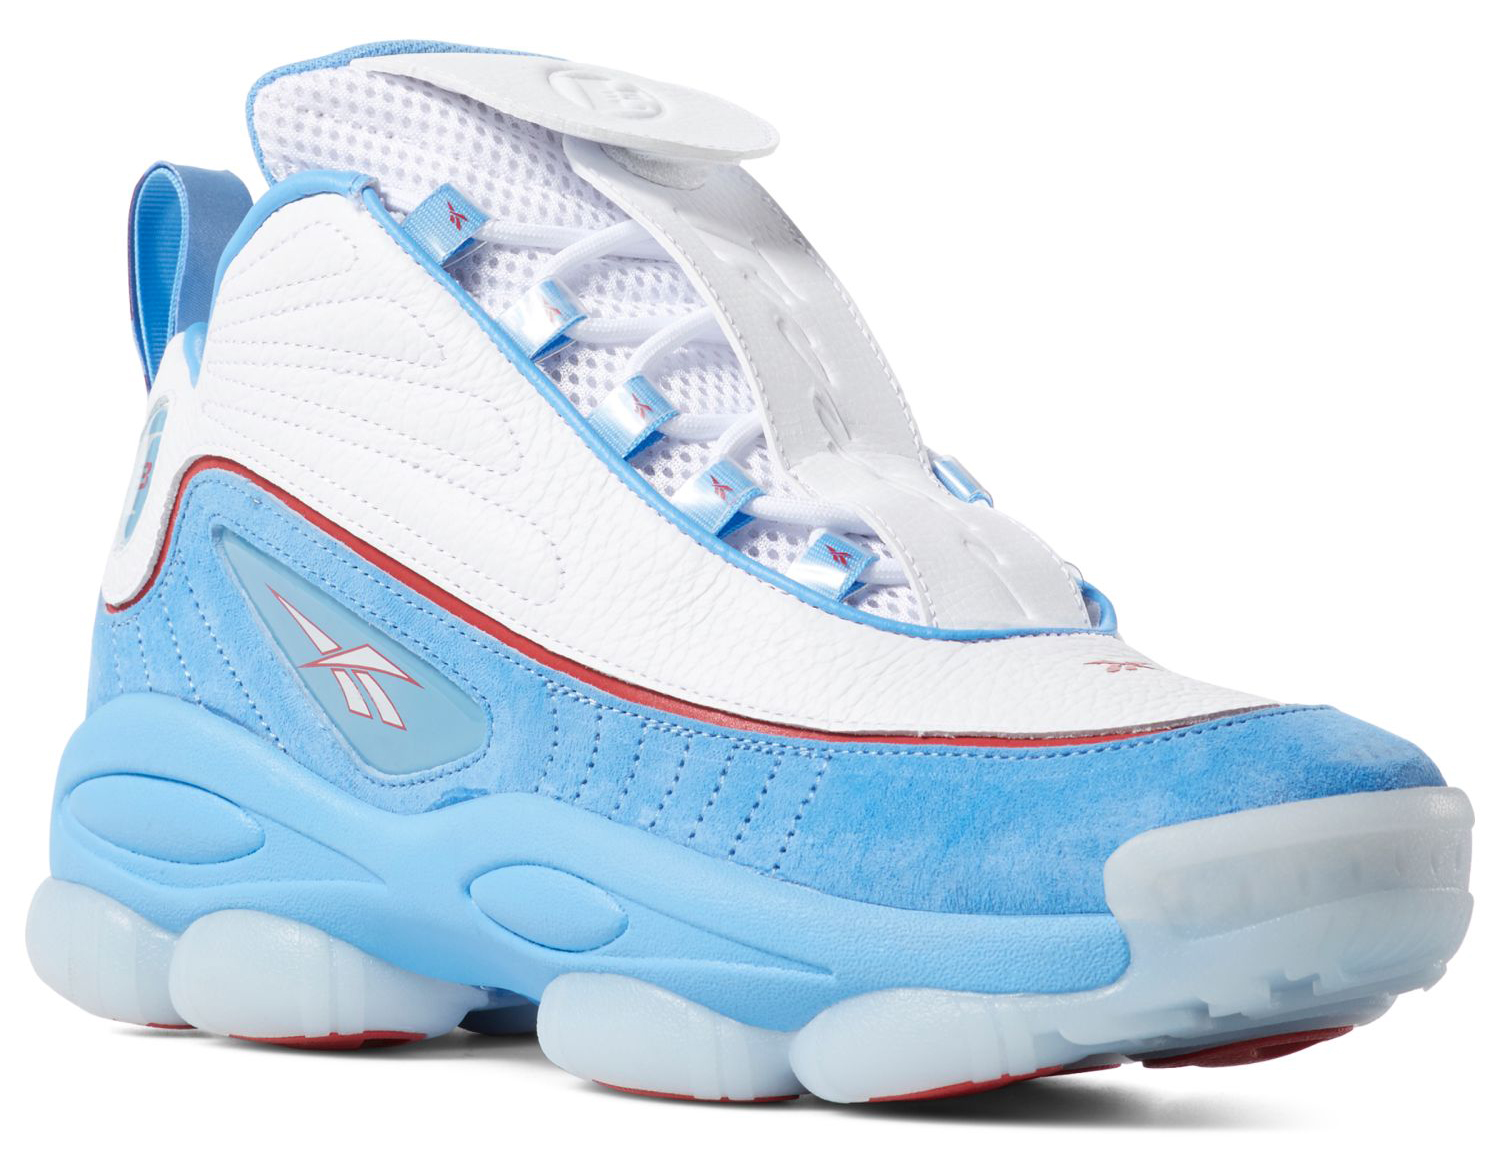 load plot Hurricane The Next Reebok Iverson Legacy Releases This Month - WearTesters